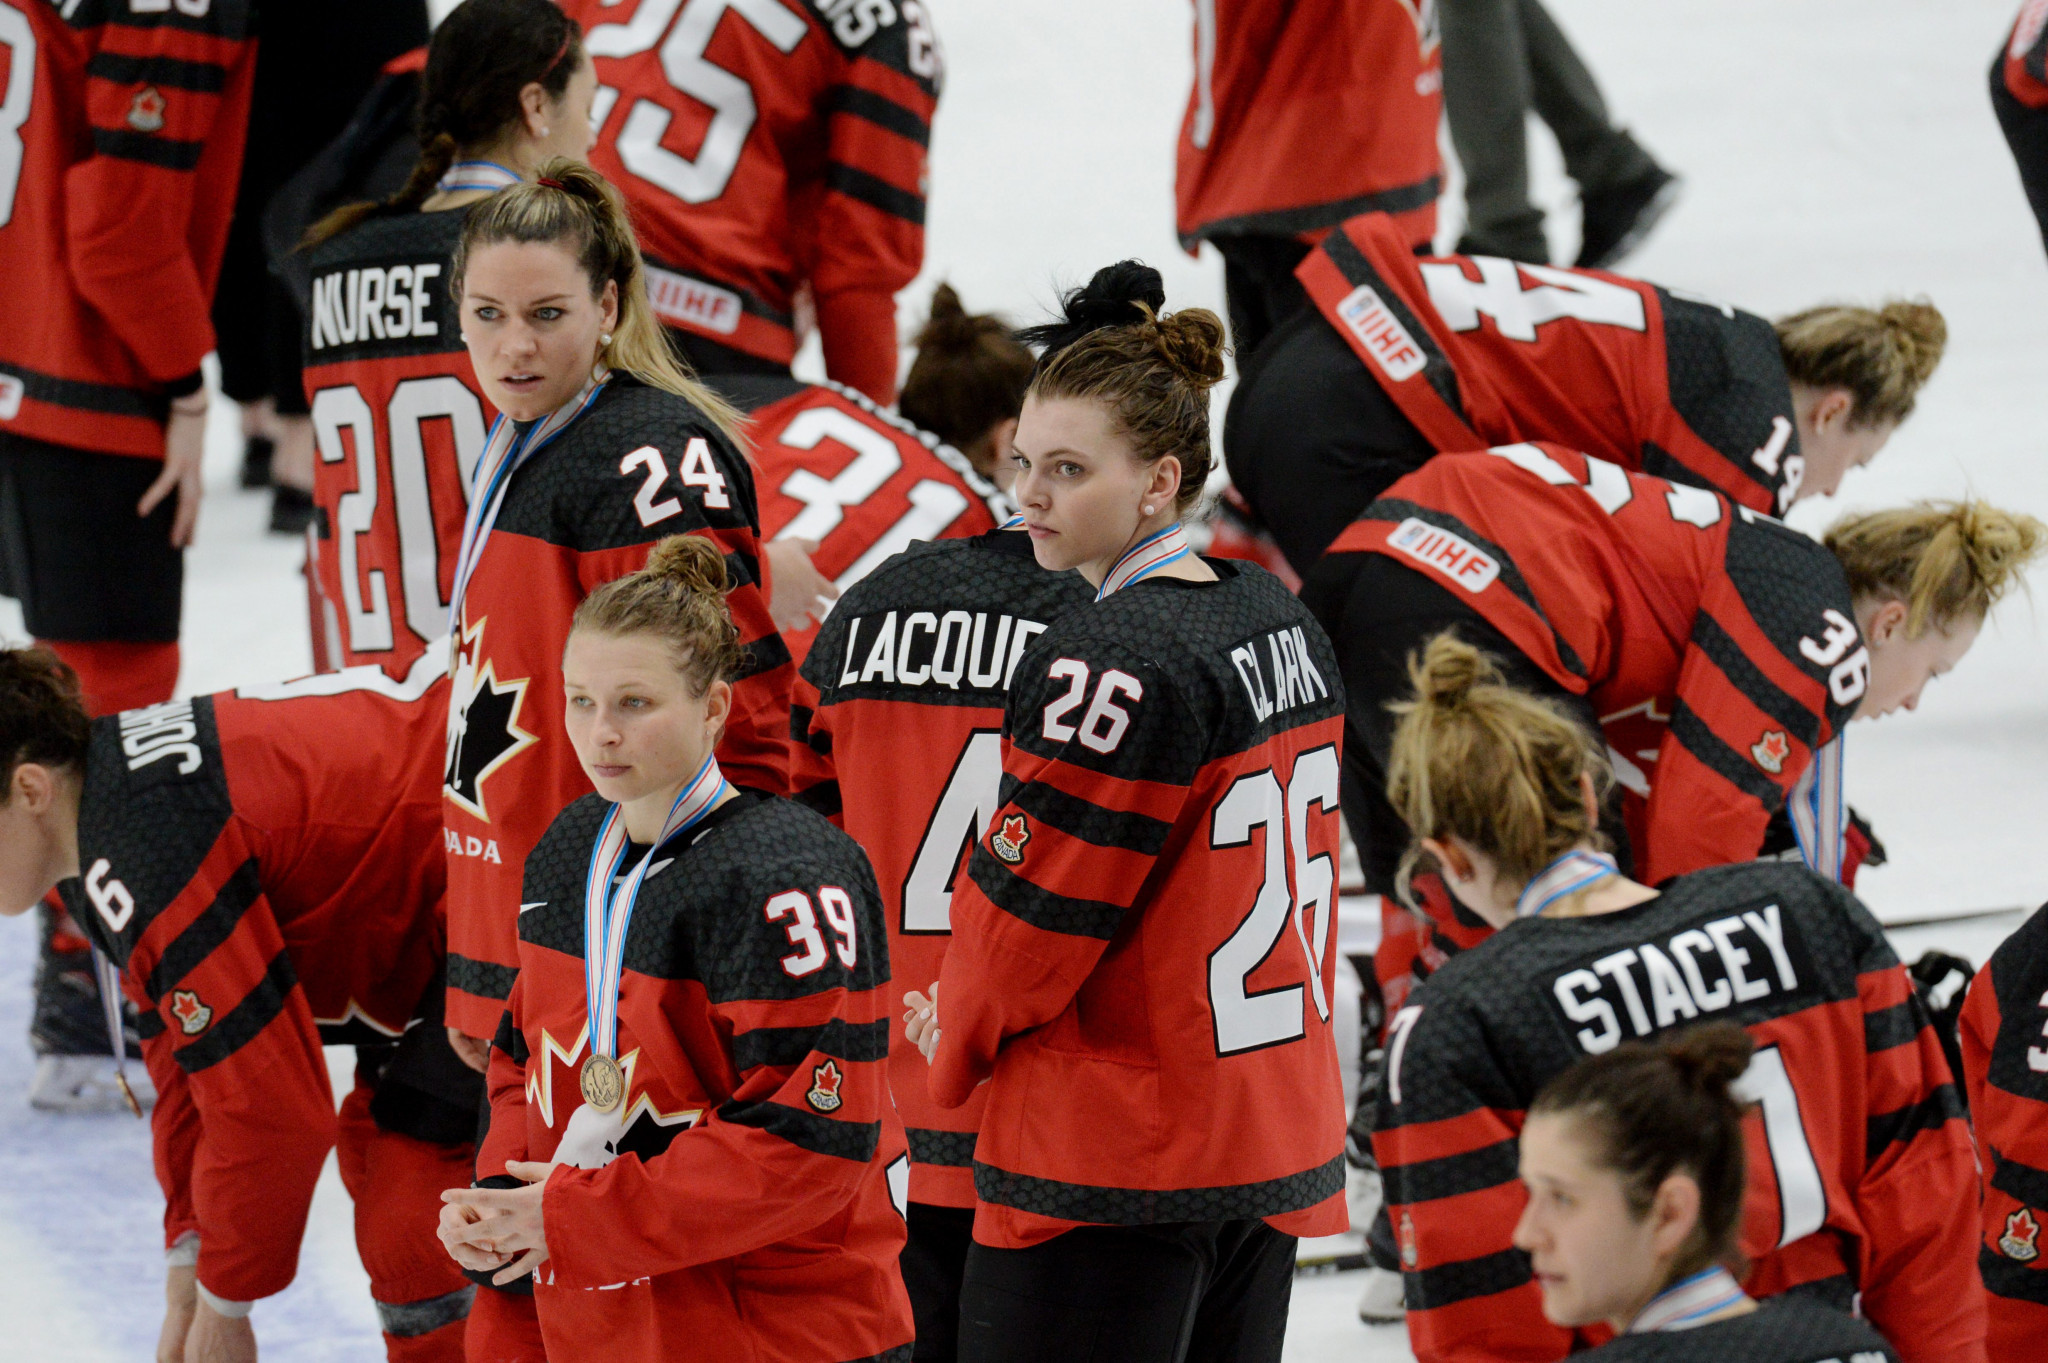 Canada is to host the upcoming IIHF Ice Hockey Women's World Championship ©Getty Images